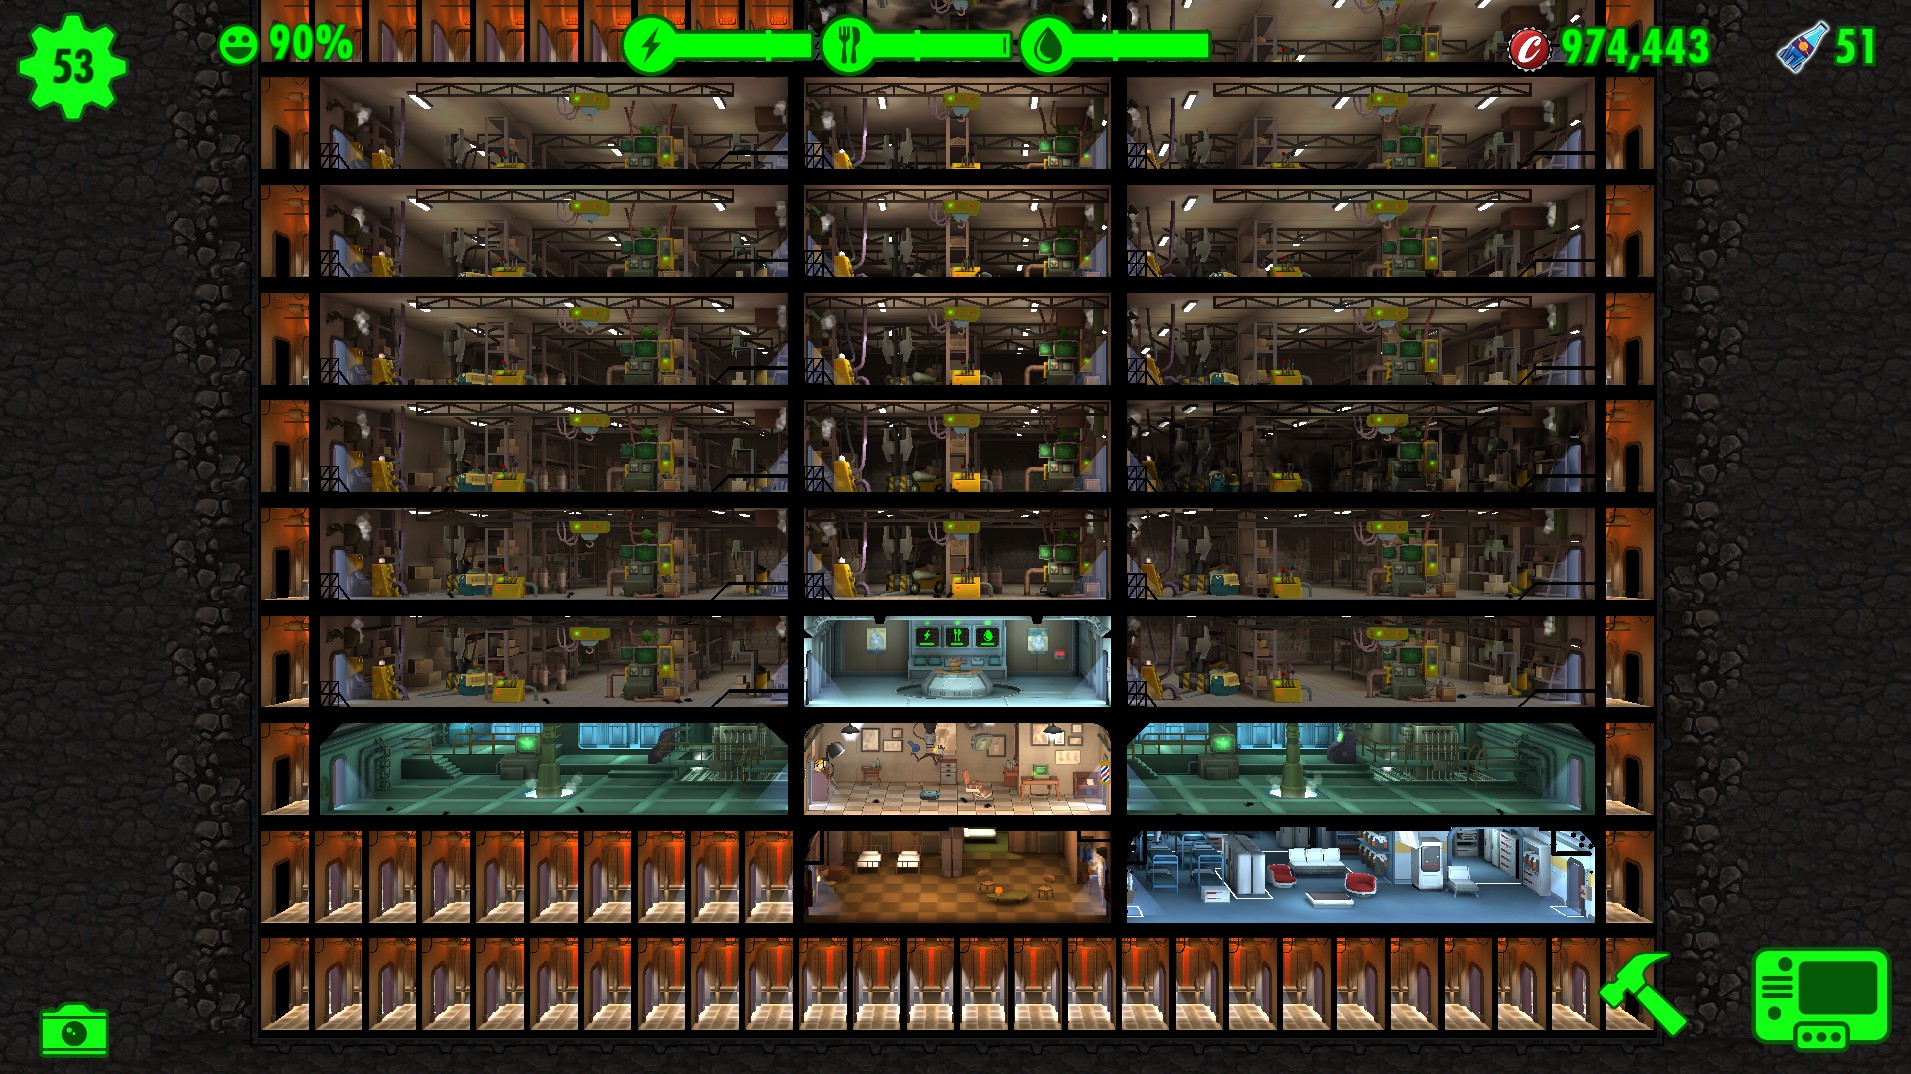 Updated Pic w/ fully merged and upgraded Nuclear reactors on the 2nd floor ...